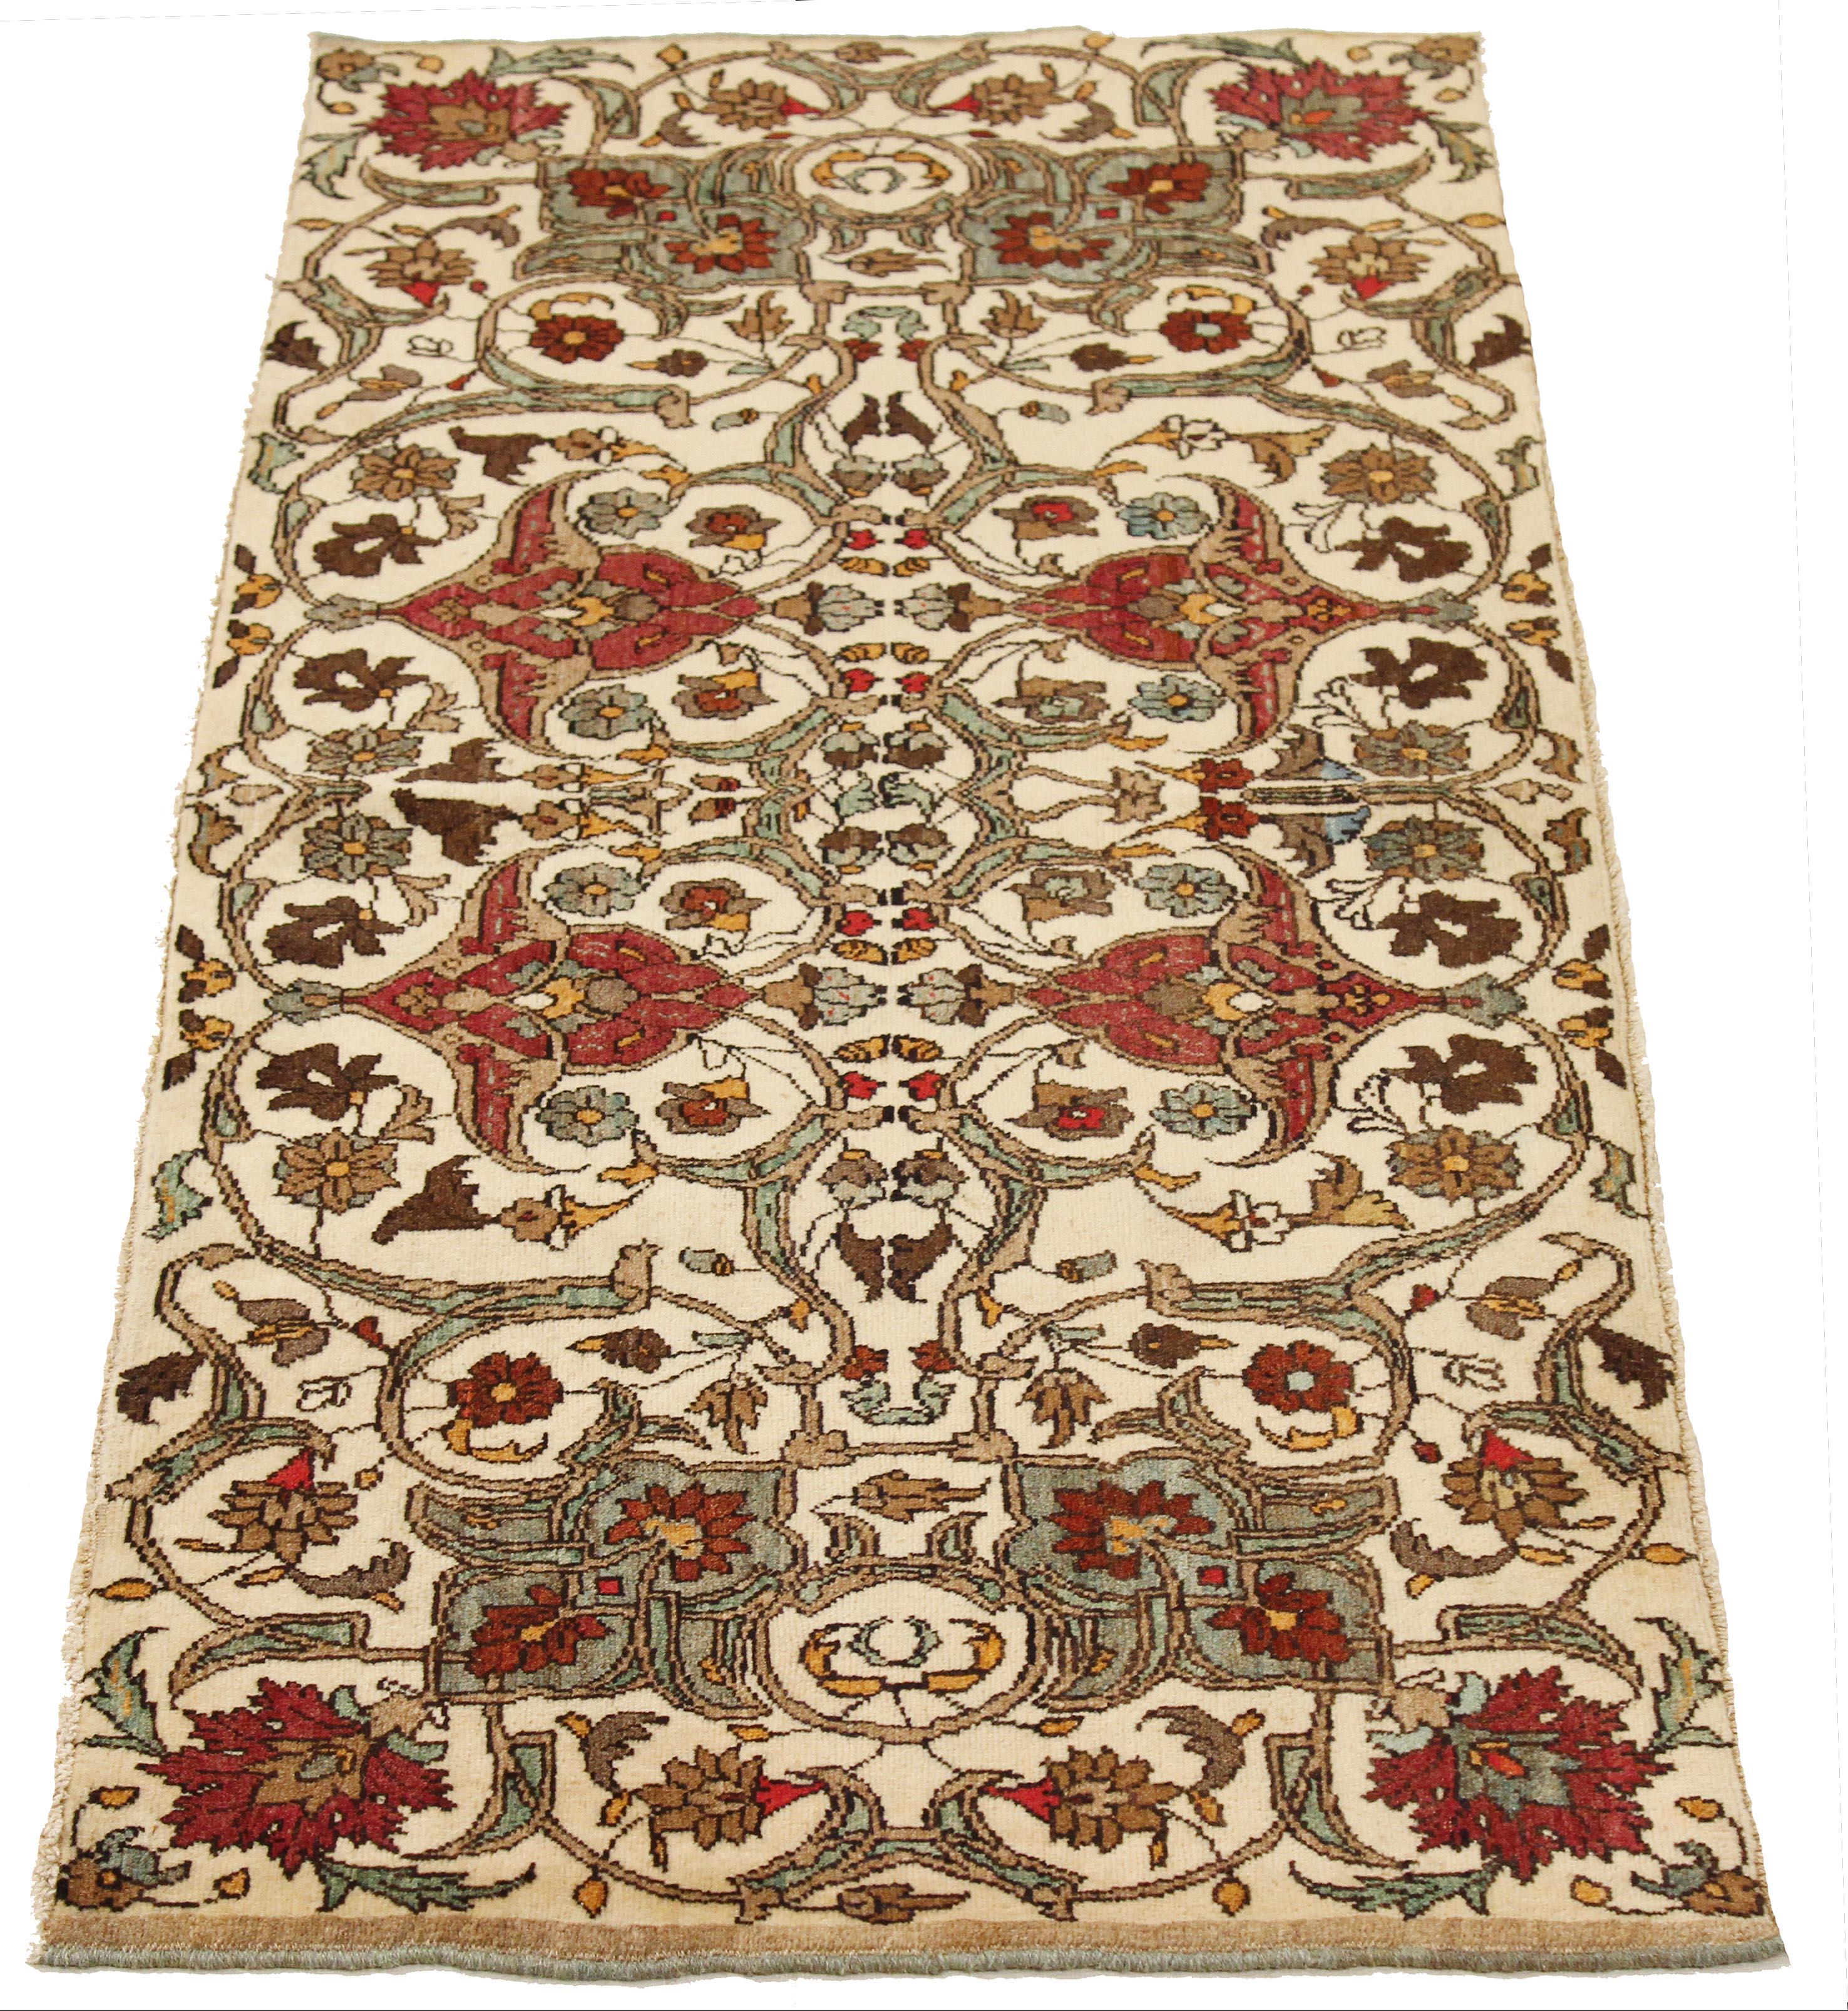 Rare antique Persian rug handwoven from the finest sheep’s wool and colored with all-natural vegetable dyes that are safe for humans and pets. It’s a traditional Semnan design featuring red and brown floral details over an ivory field. It’s a lovely